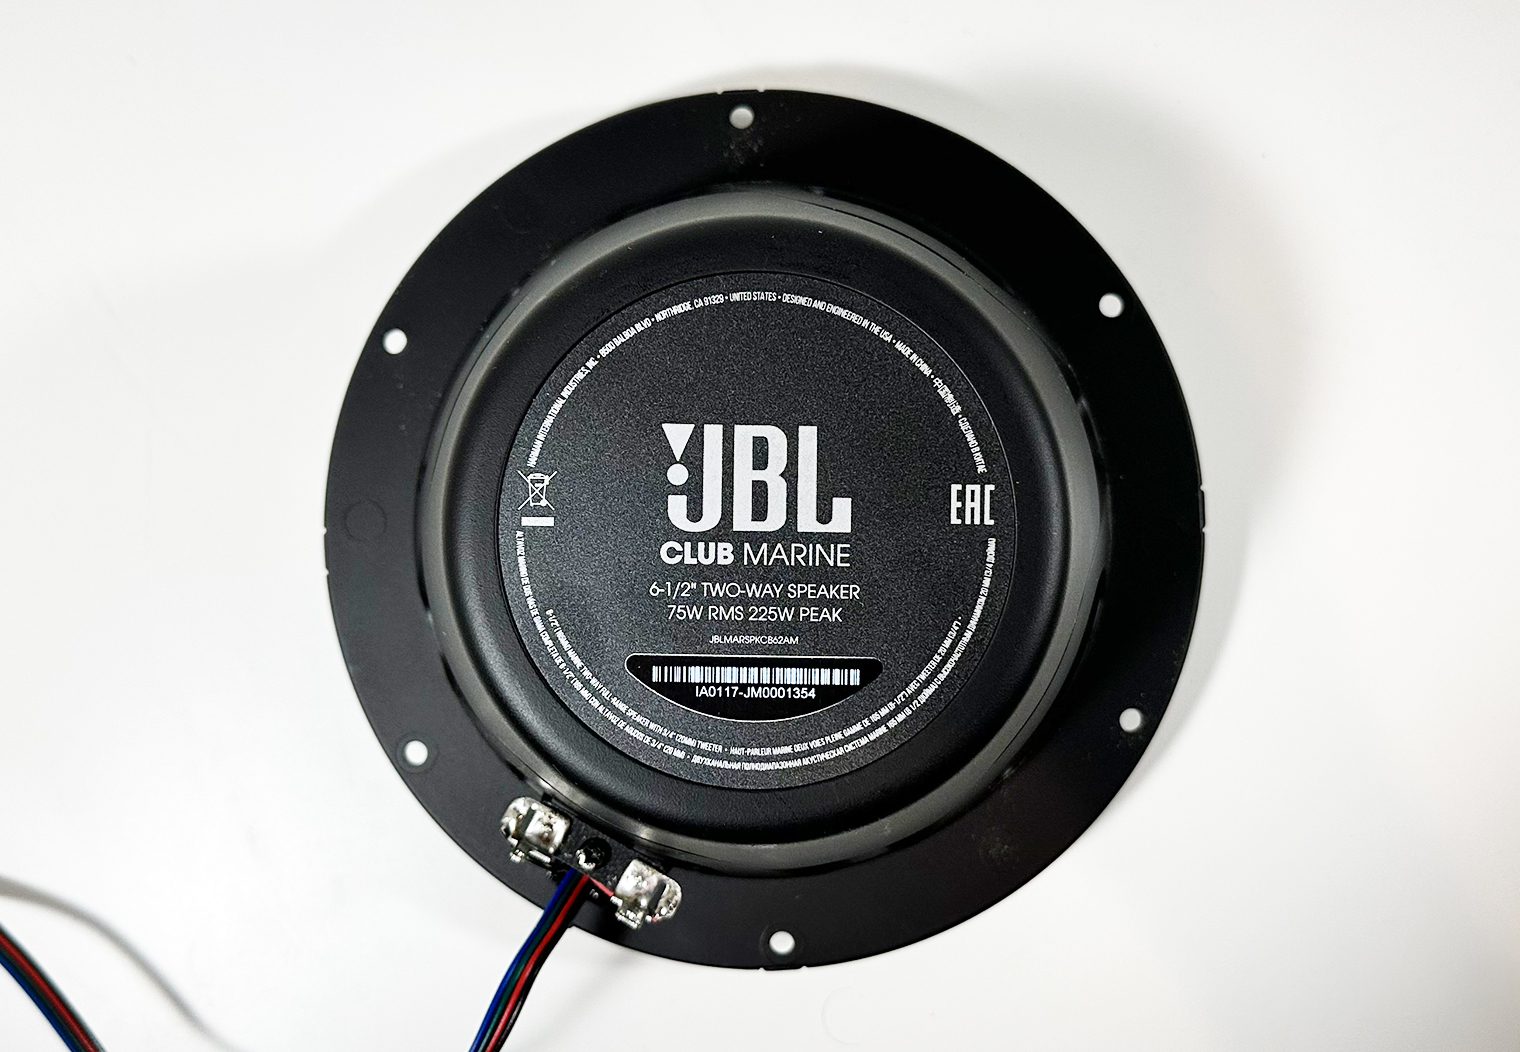 JBL Club Marine 6 1/2in Speakers to show the one piece polymer basket